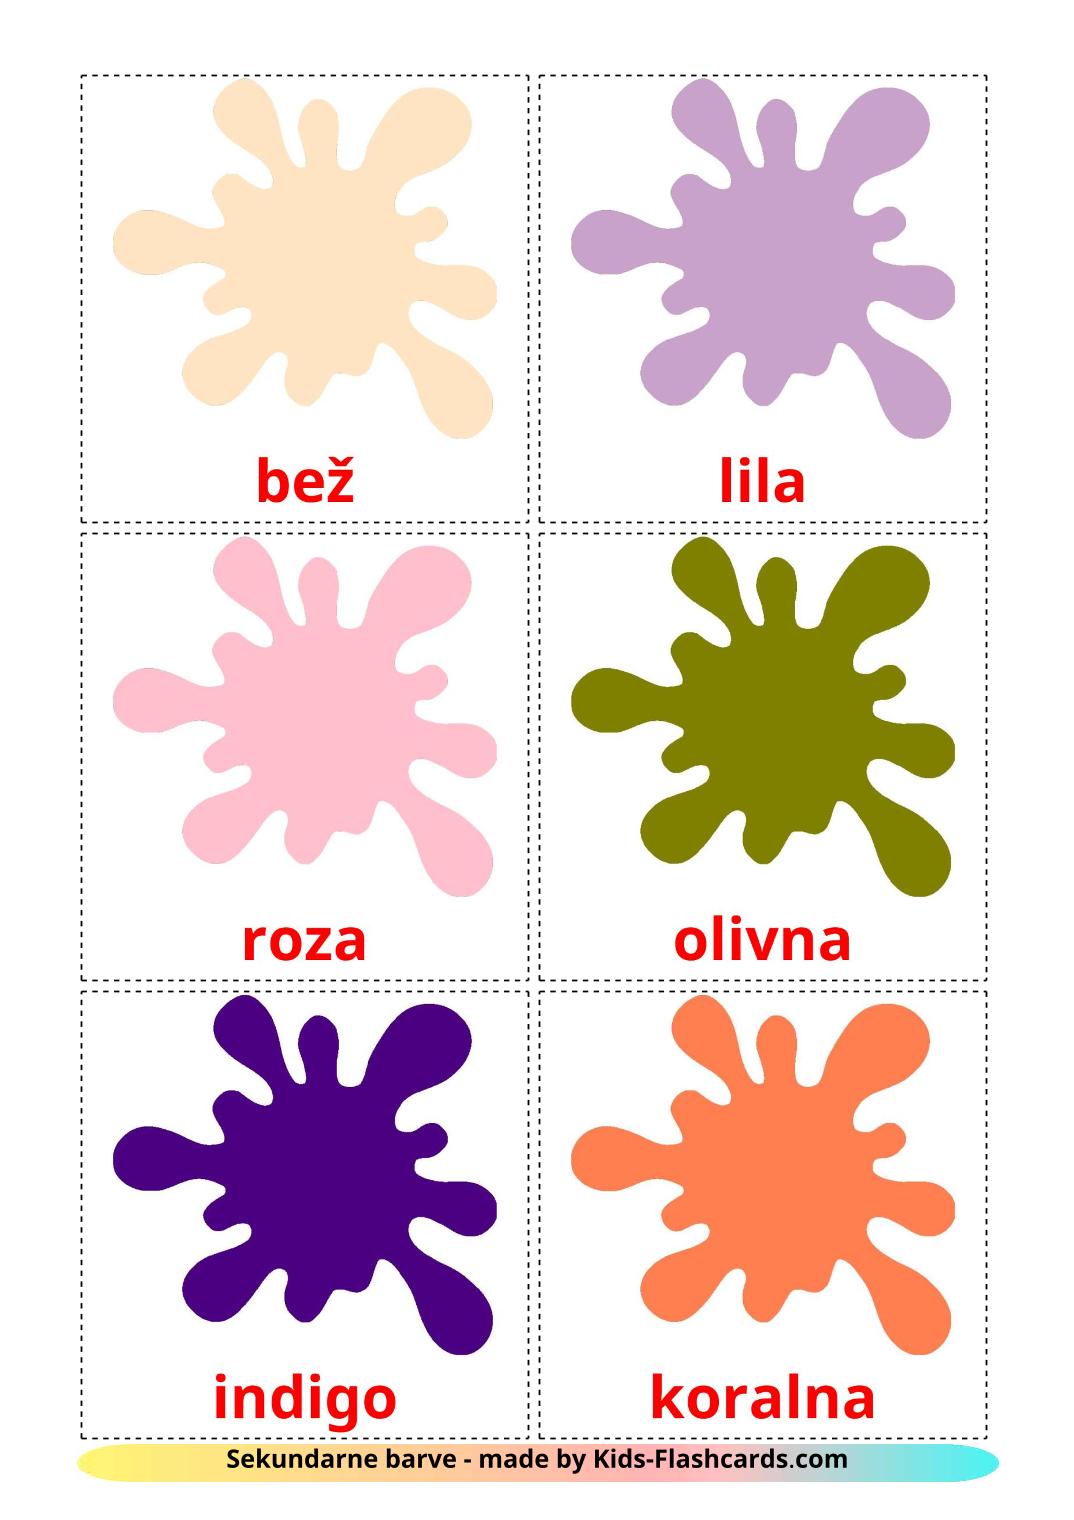 Secondary colors - 20 Free Printable slovenian Flashcards 